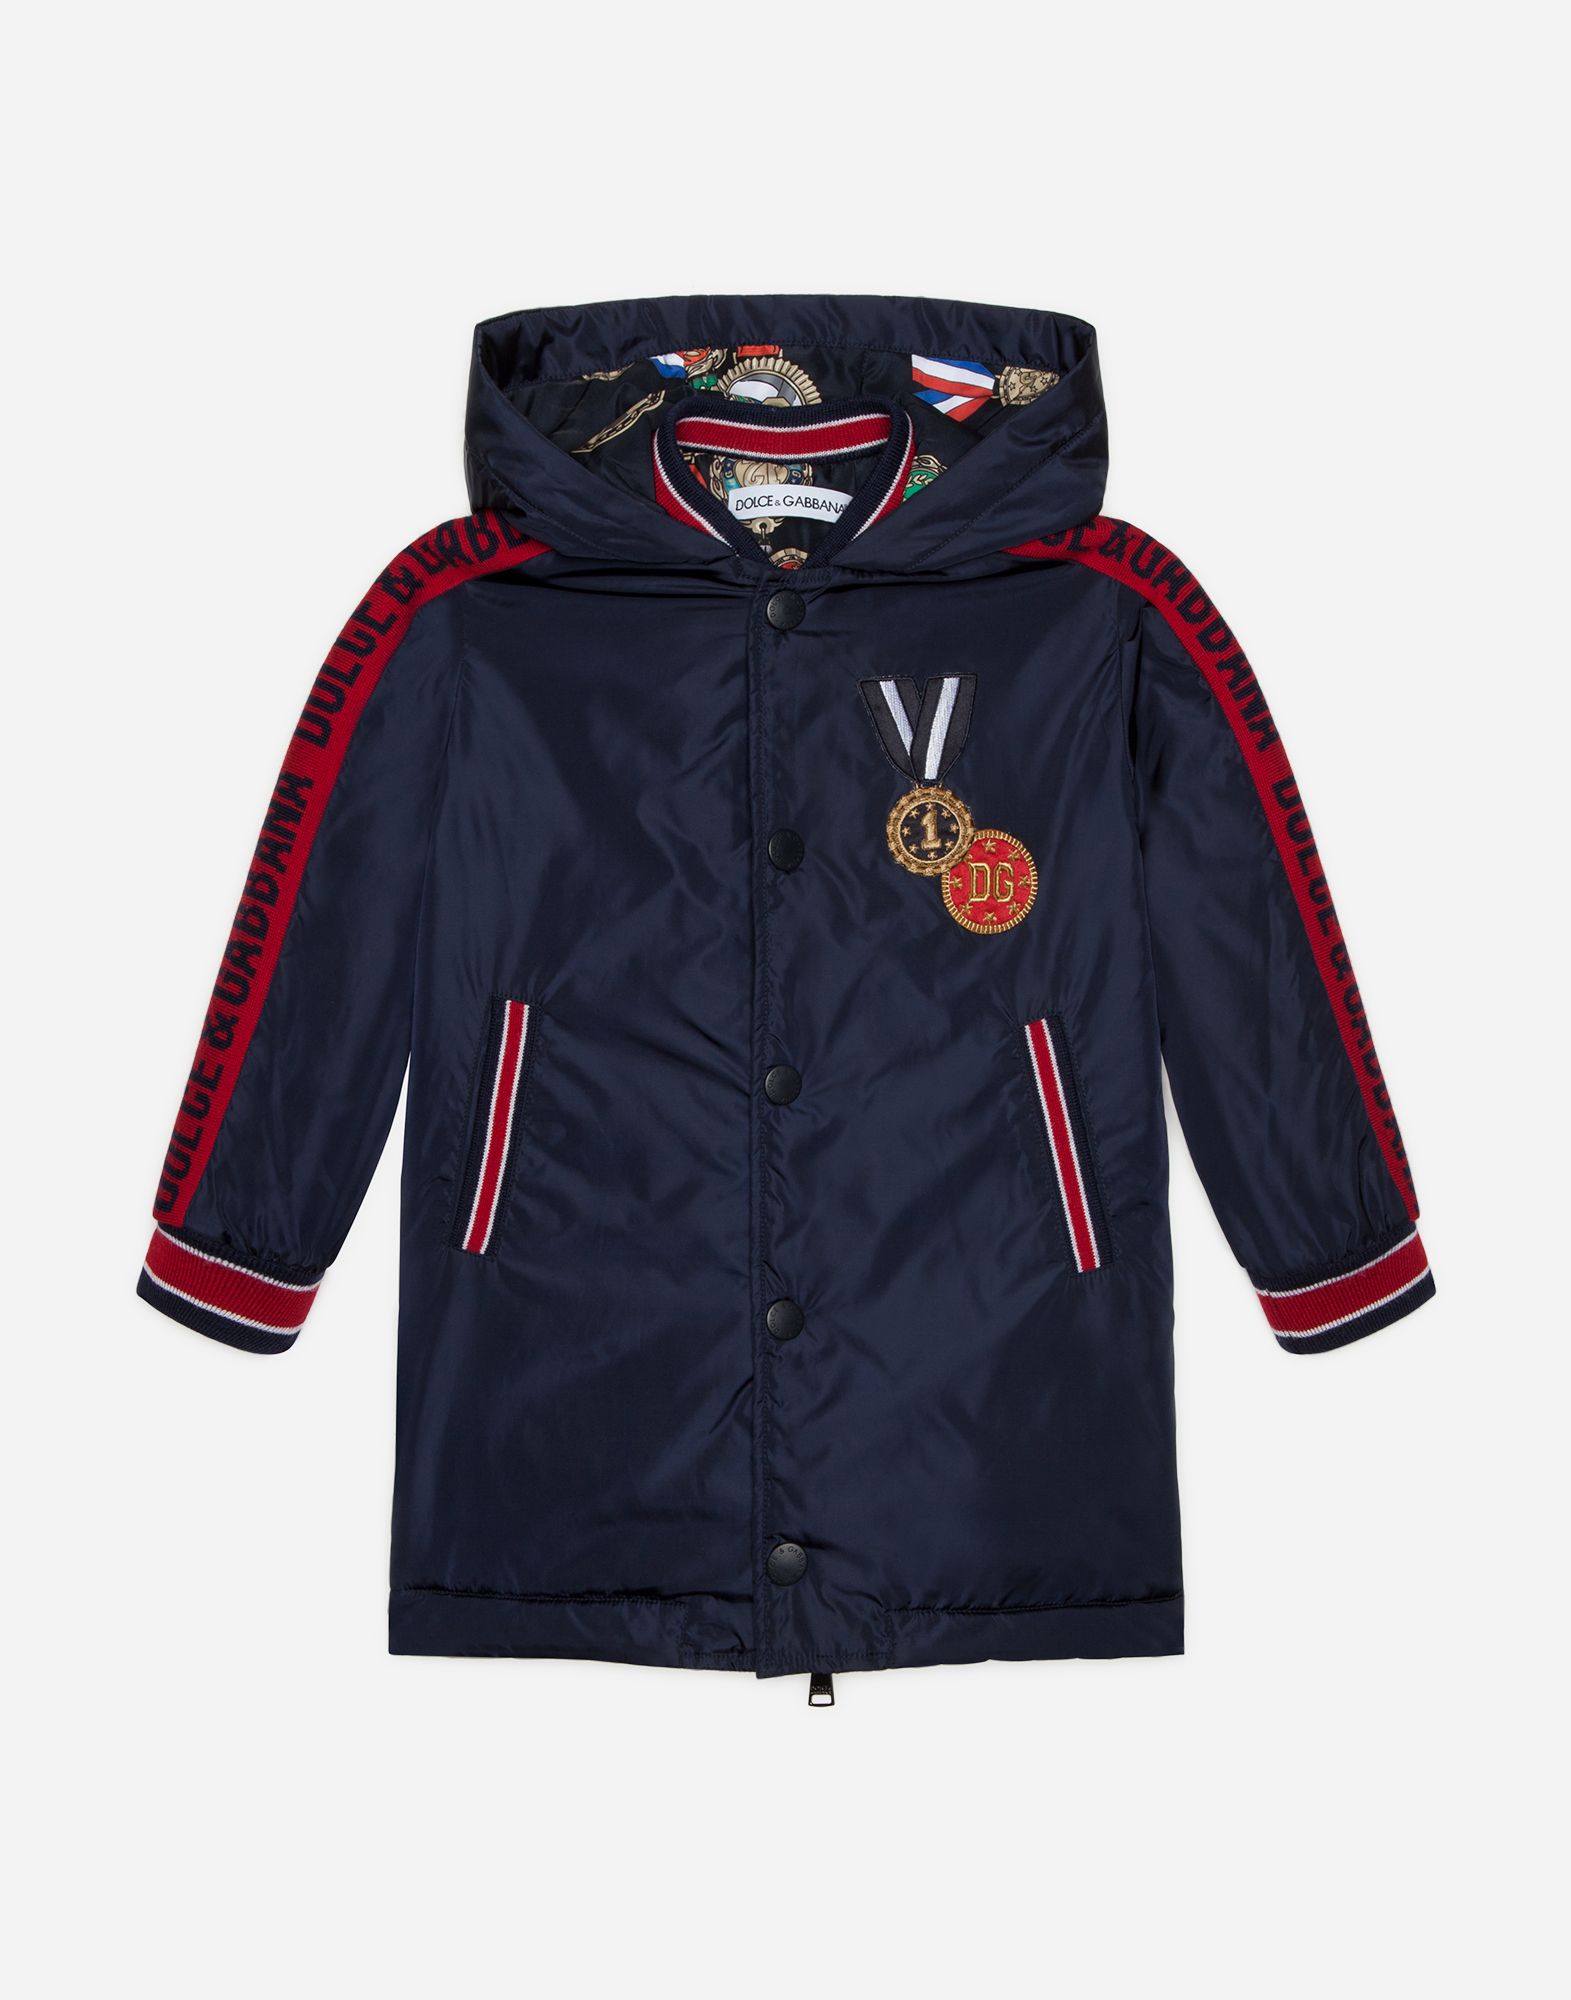 DOLCE & GABBANA Long nylon jacket with medal patch